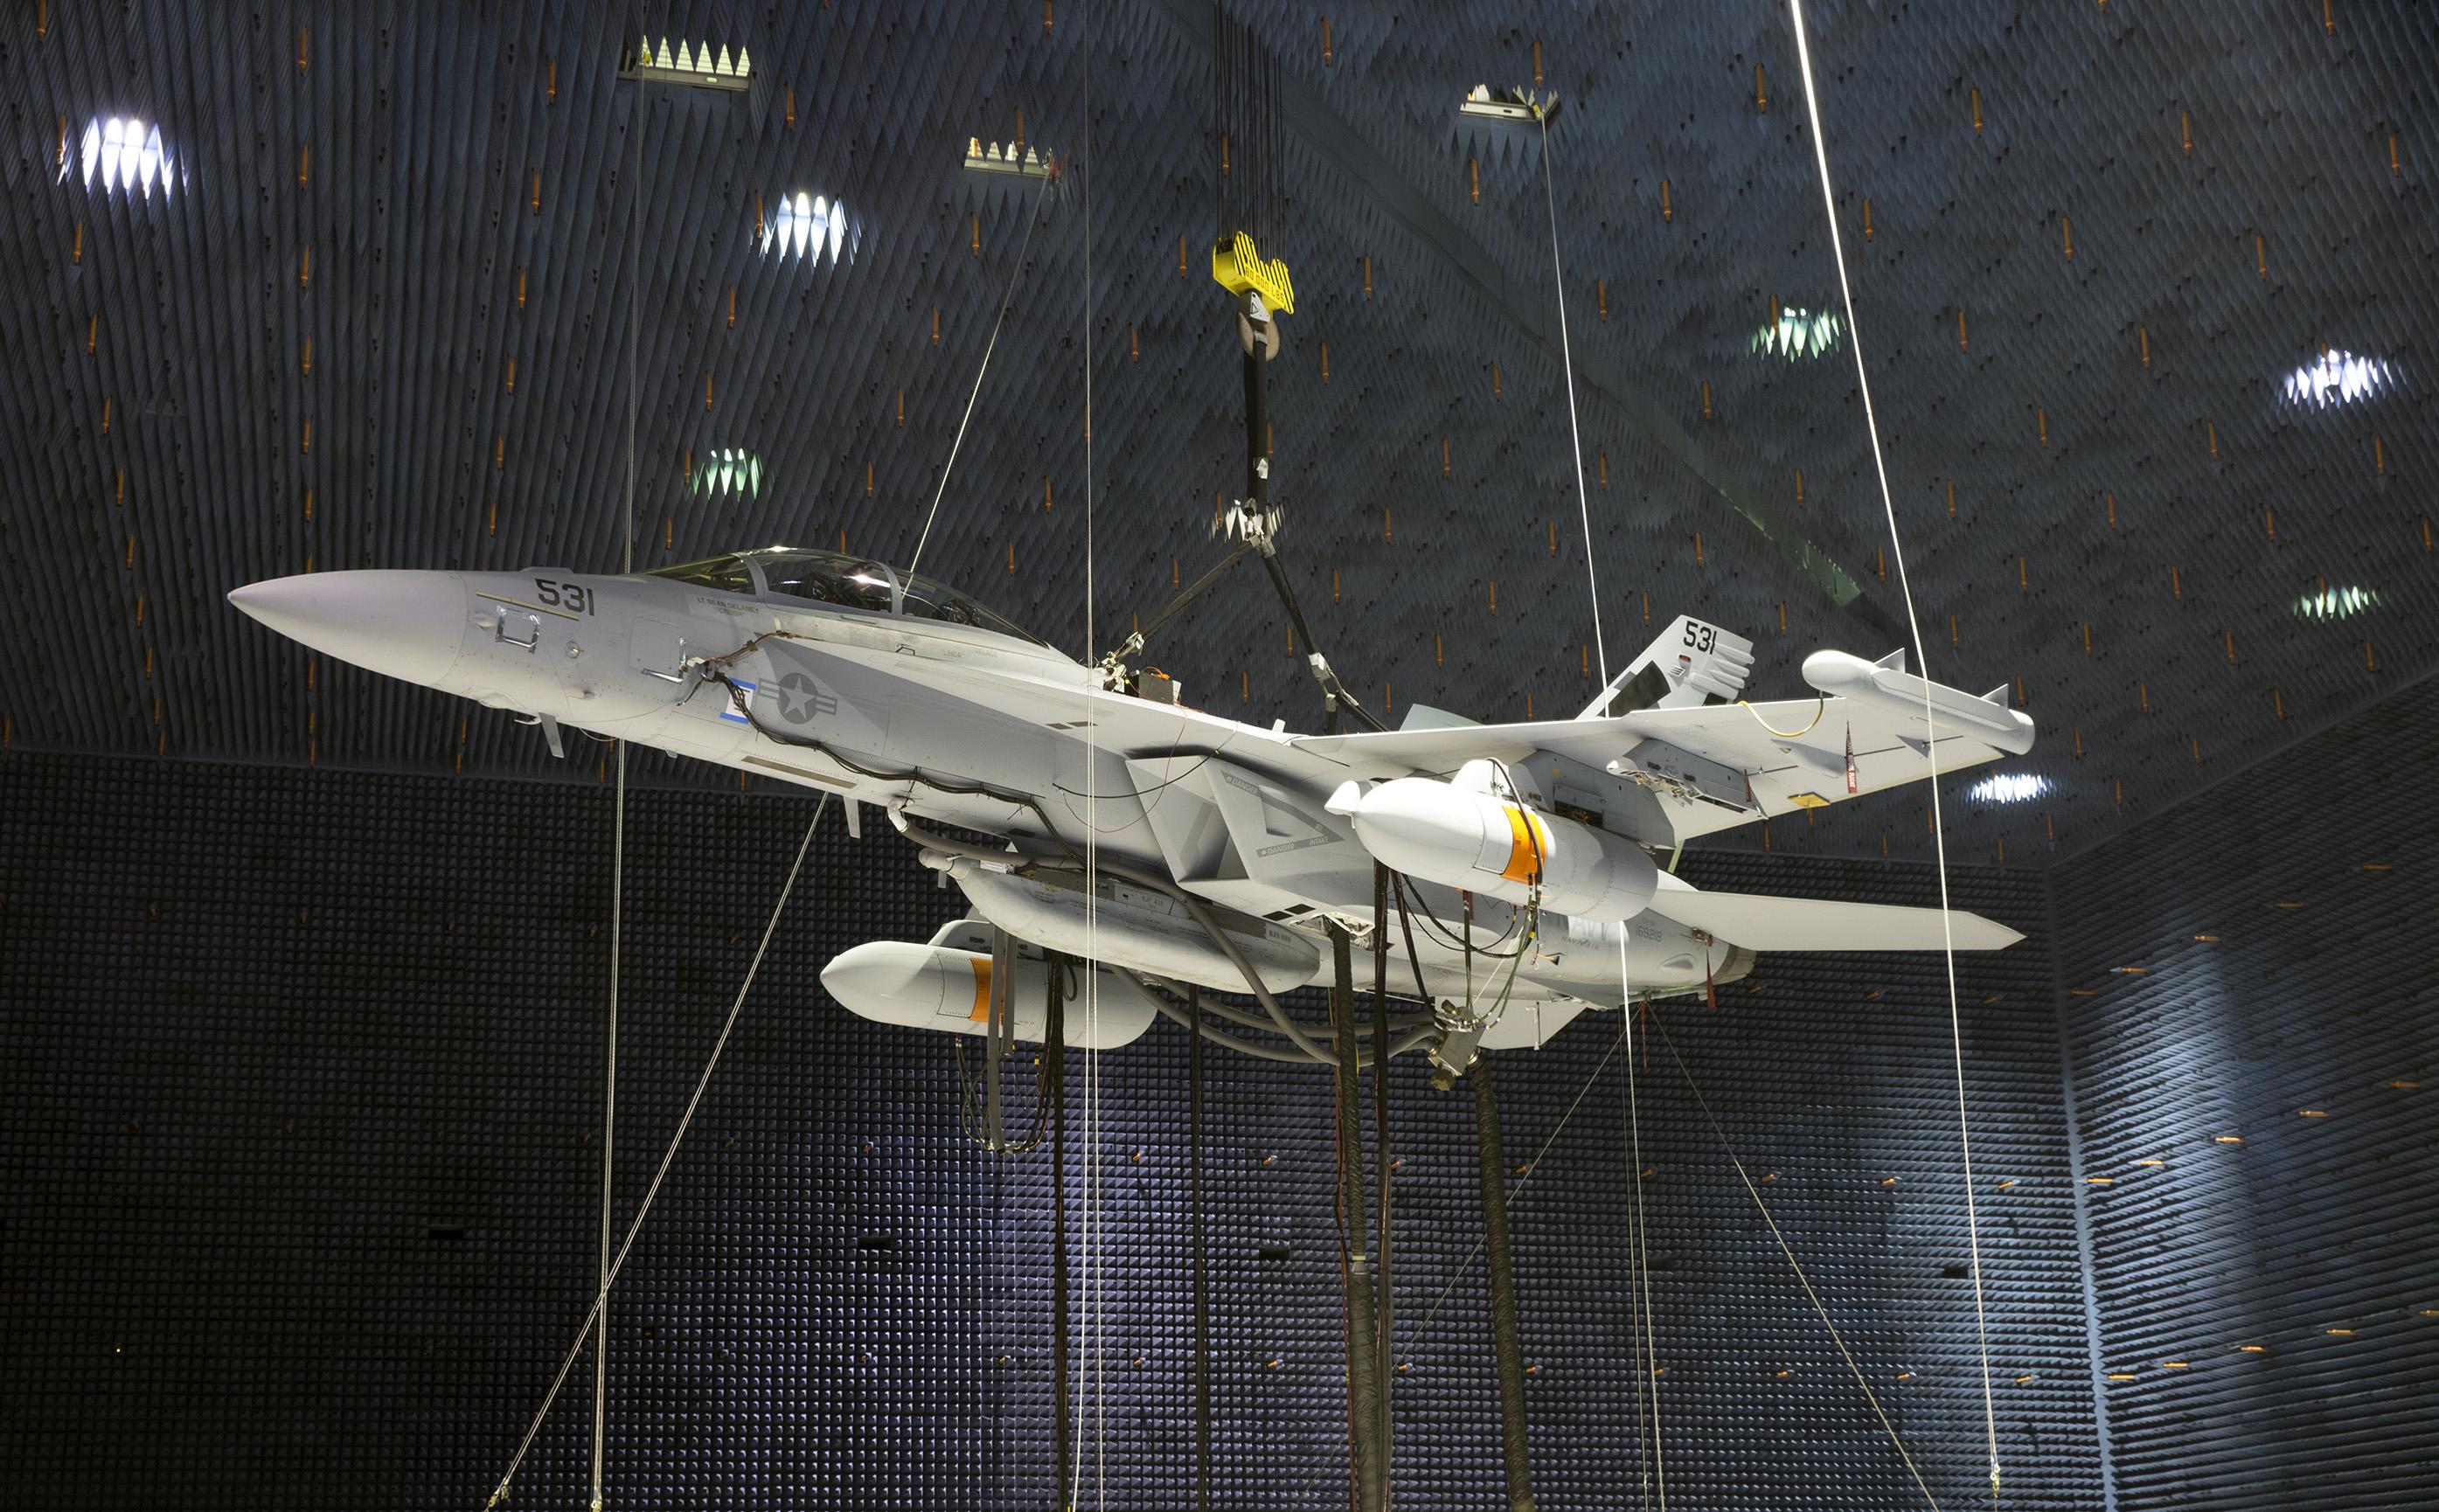 Two Next Generation Jammer Mid-Band pods, attached to an EA-18G Growler, undergo testing in the Air Combat Environmental Test and Evaluation Facility anechoic chamber at Naval Air Station Patuxent River, Md. (U.S. Navy photo)